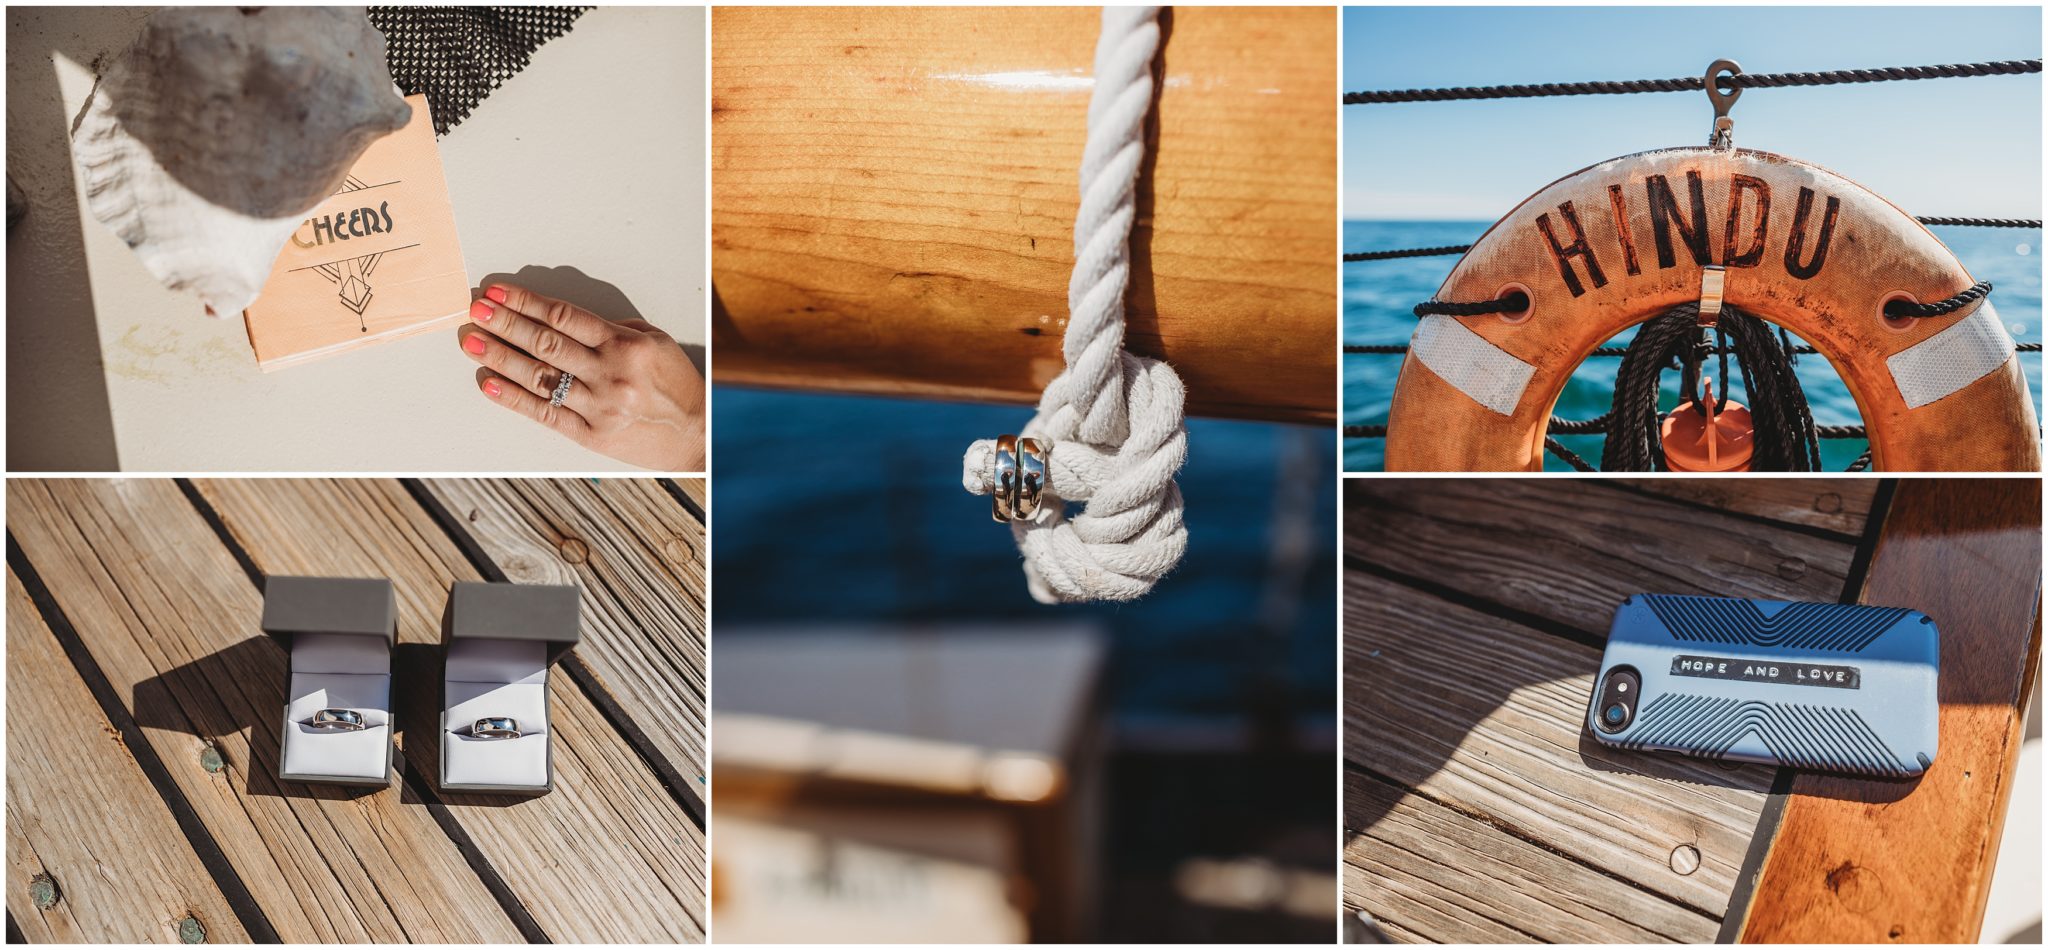 grooms rings on boat - boston destination wedding photography